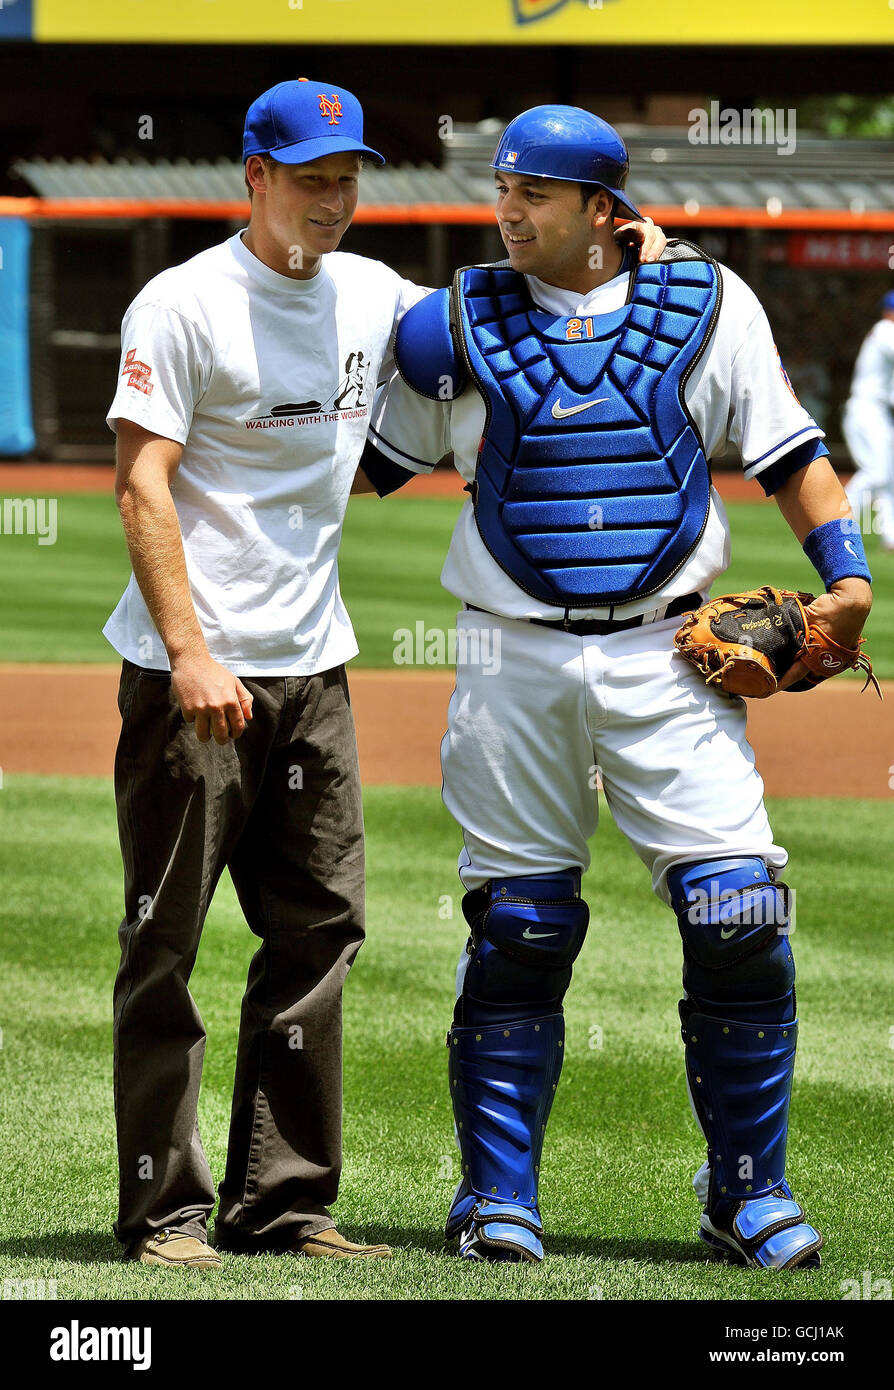 Prince Harry with Rod Barajas the Mets catcher at the New York Mets  stadium, ahead of this evening's match between the Minnesota Twins and the  New York Mets Stock Photo - Alamy